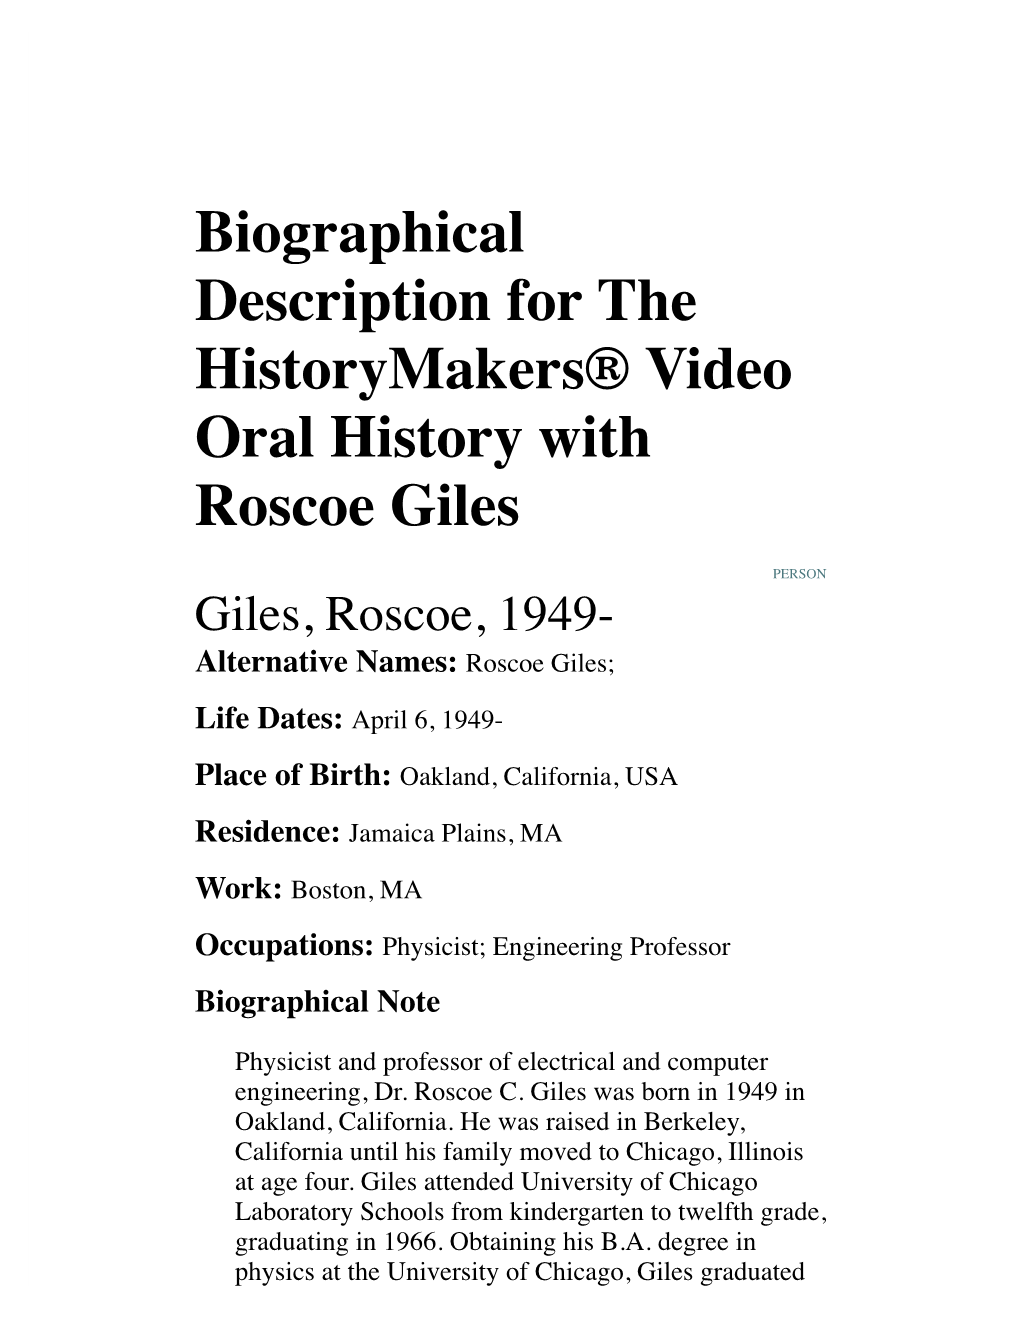 Biographical Description for the Historymakers® Video Oral History with Roscoe Giles